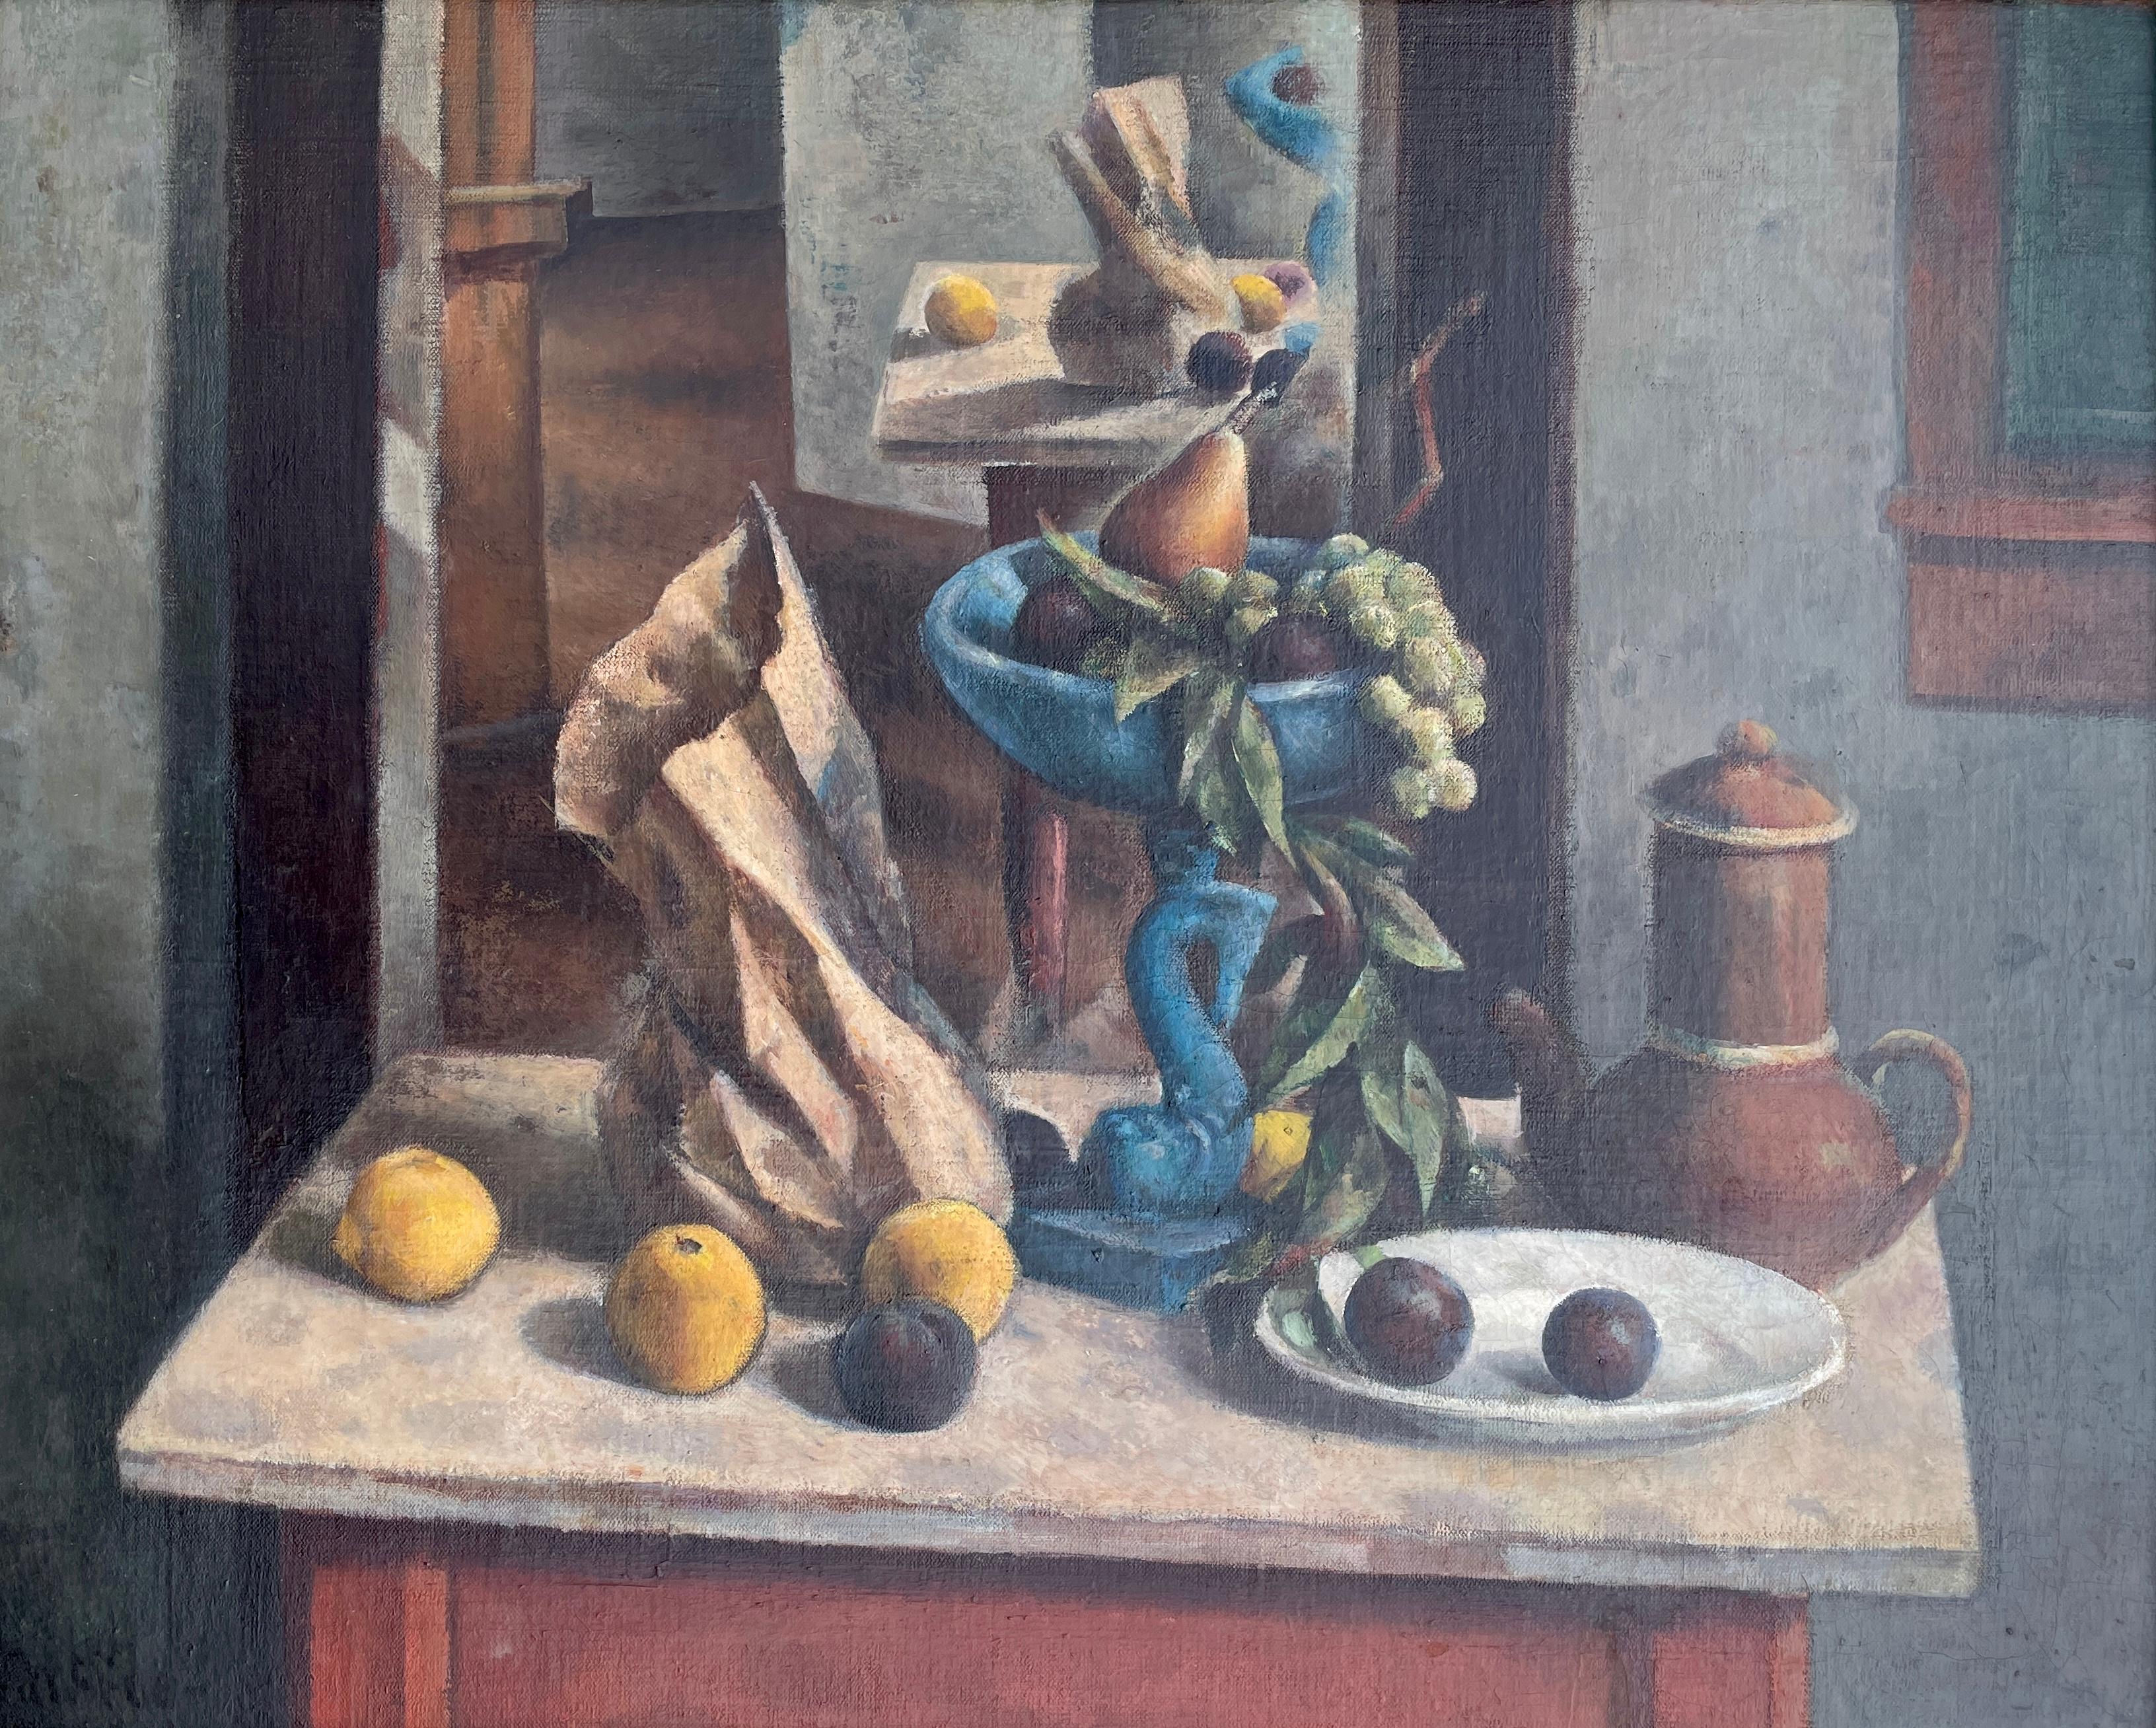 Exceptional modernist still life by Henry Lee McFee. 

The Blue Compote (1930-31)
Oil on canvas
24